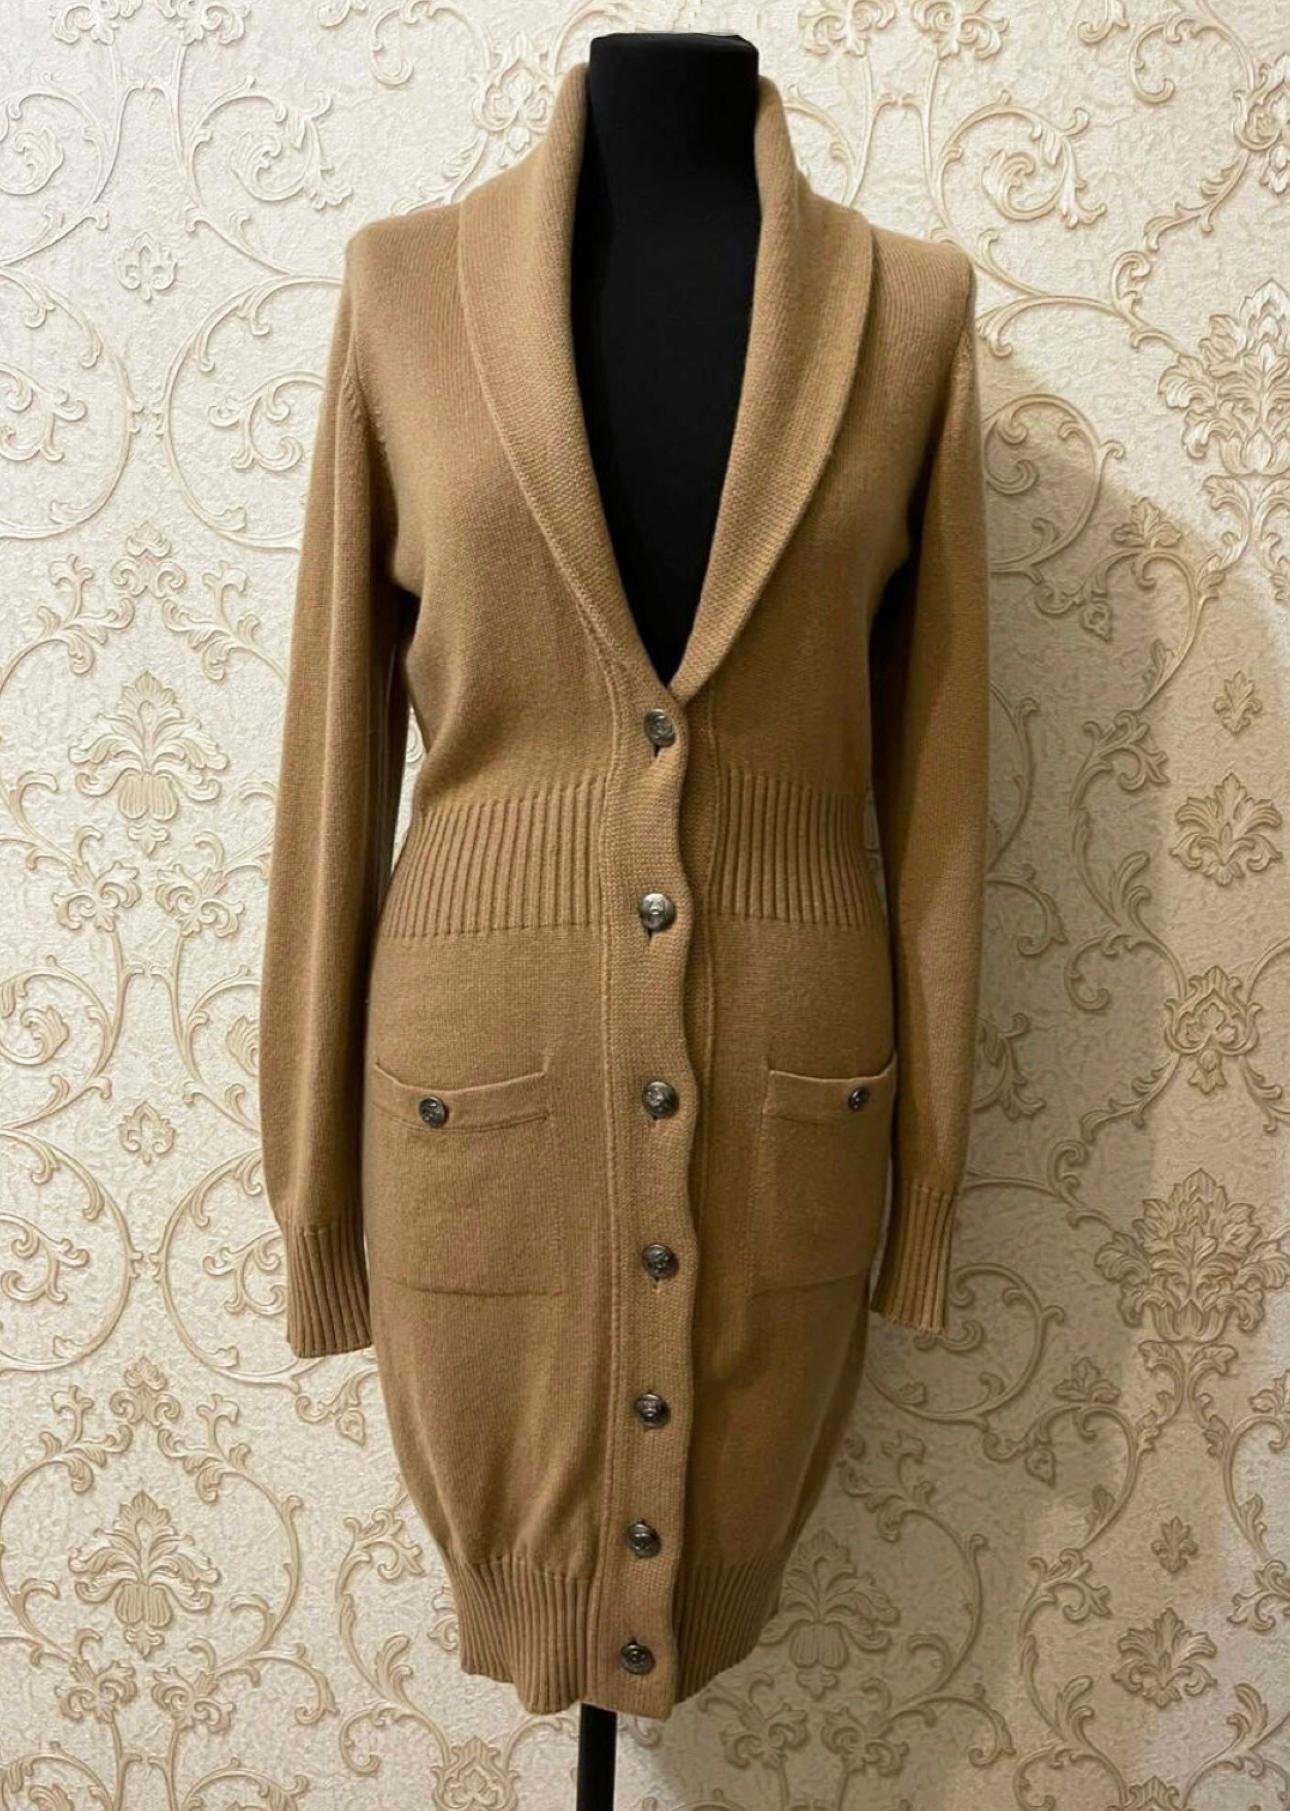 Women's or Men's Chanel Claudia Schiffer Style Camel Cashmere Cardi Coat For Sale